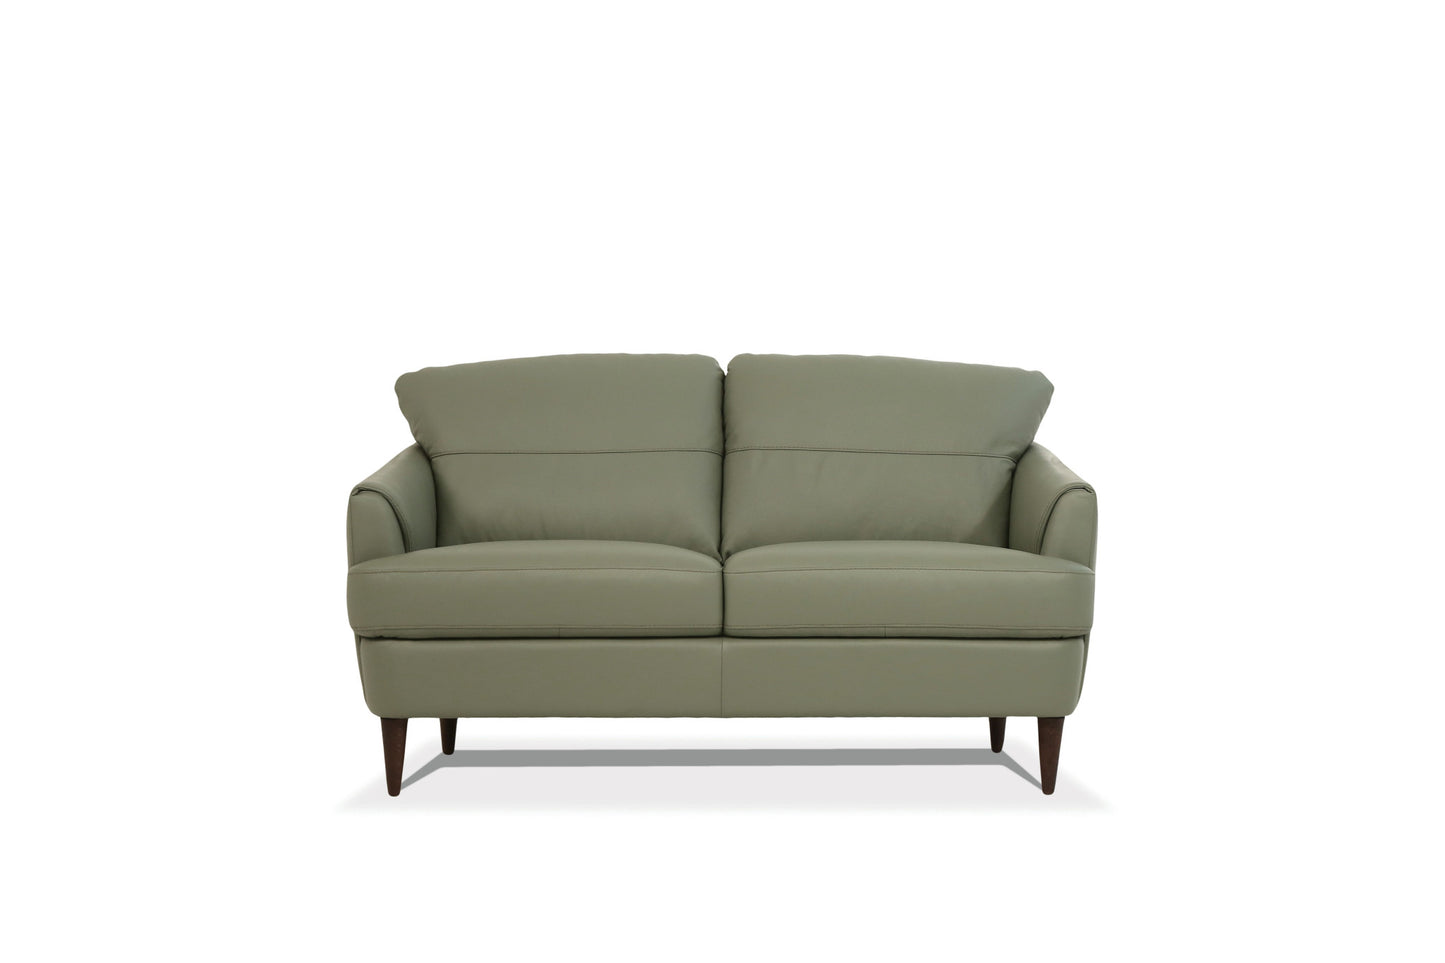 58" Green And Brown Leather Love Seat